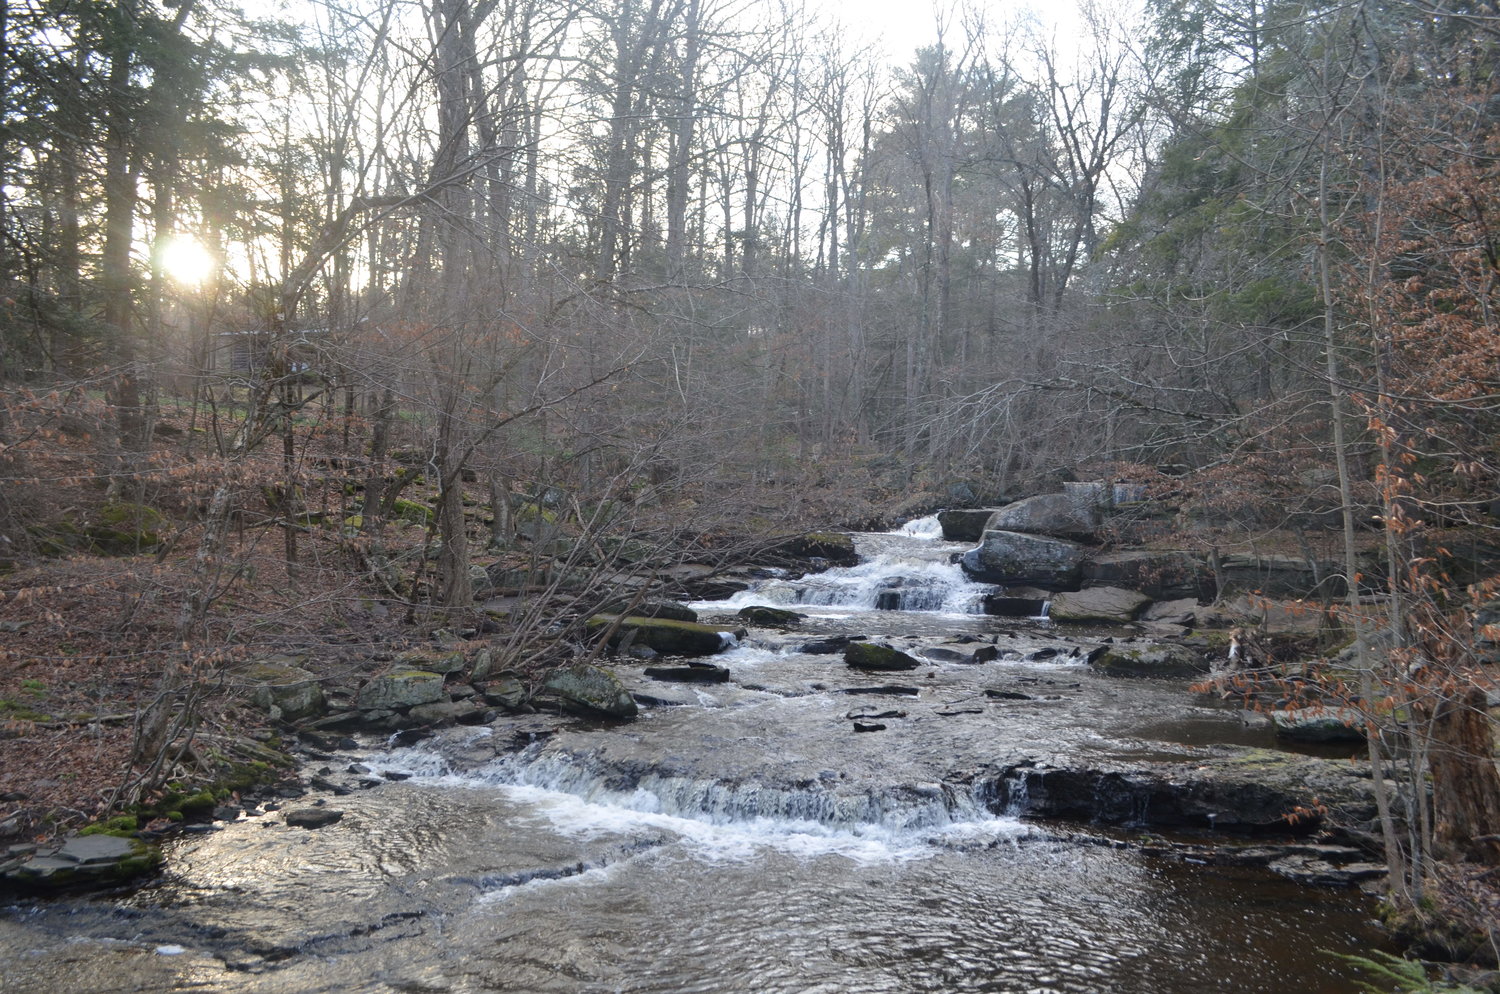 Minnie Falls, part of a pre-existing town park added to the former golf course property to create the Forest Reserve.